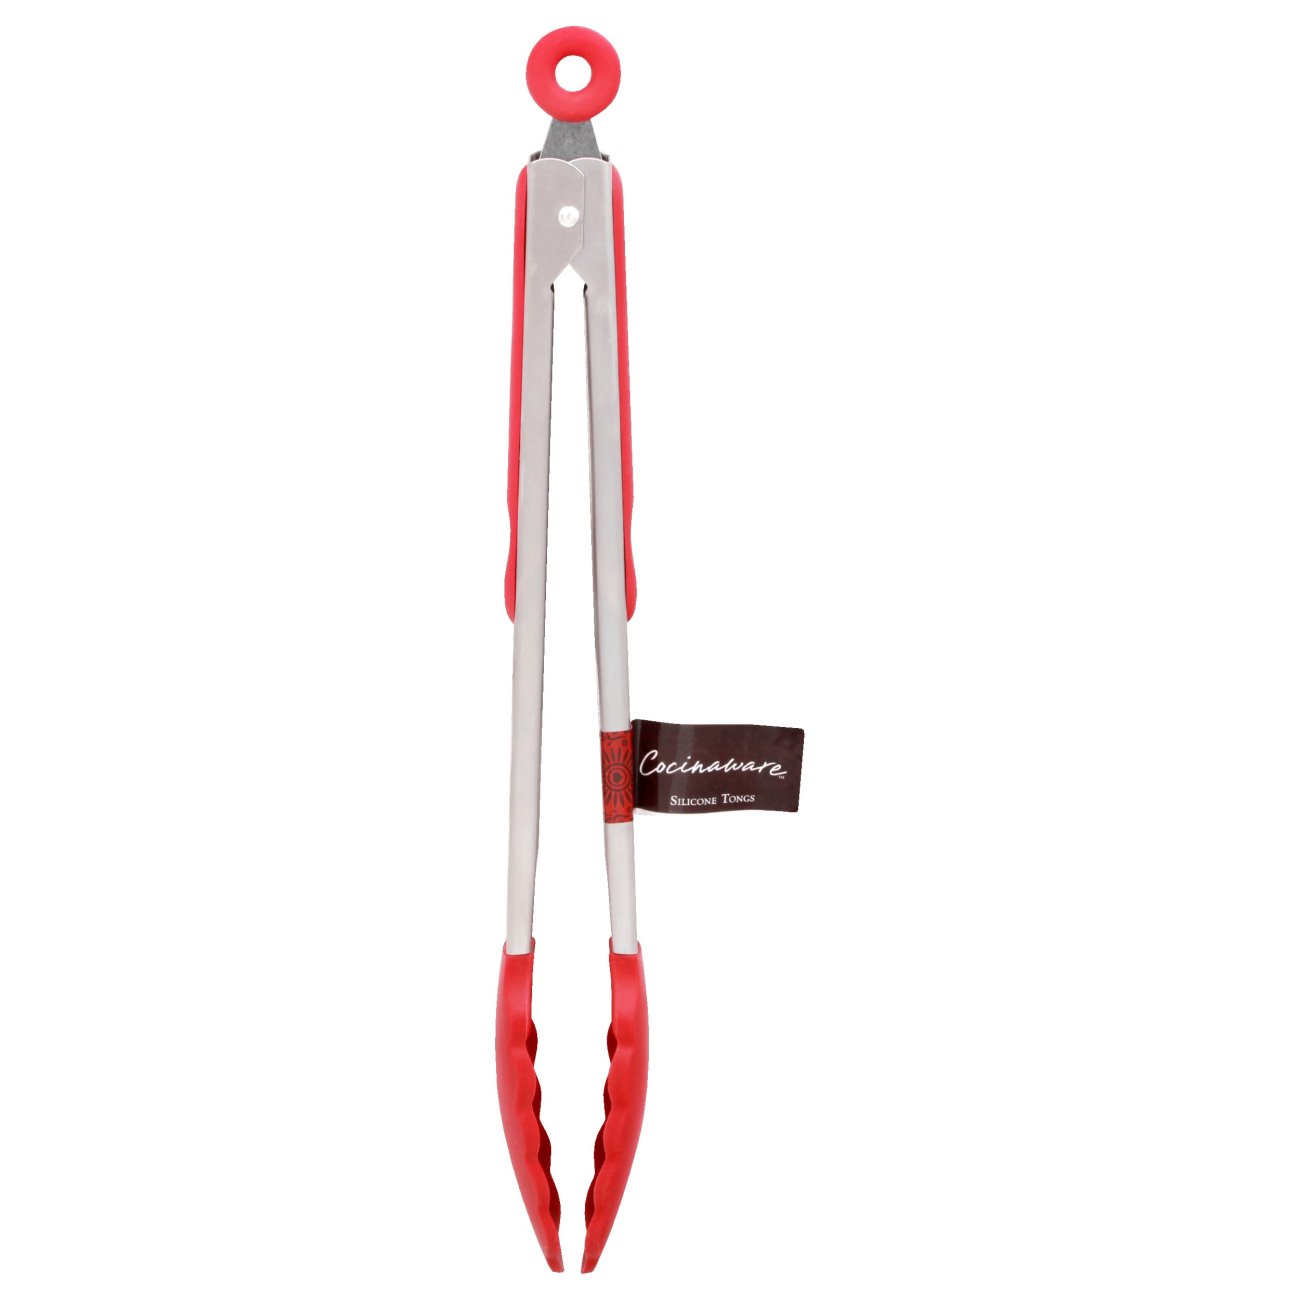 Cocinaware Red Silicone Tongs With Stainless Steel Handles - Shop ...